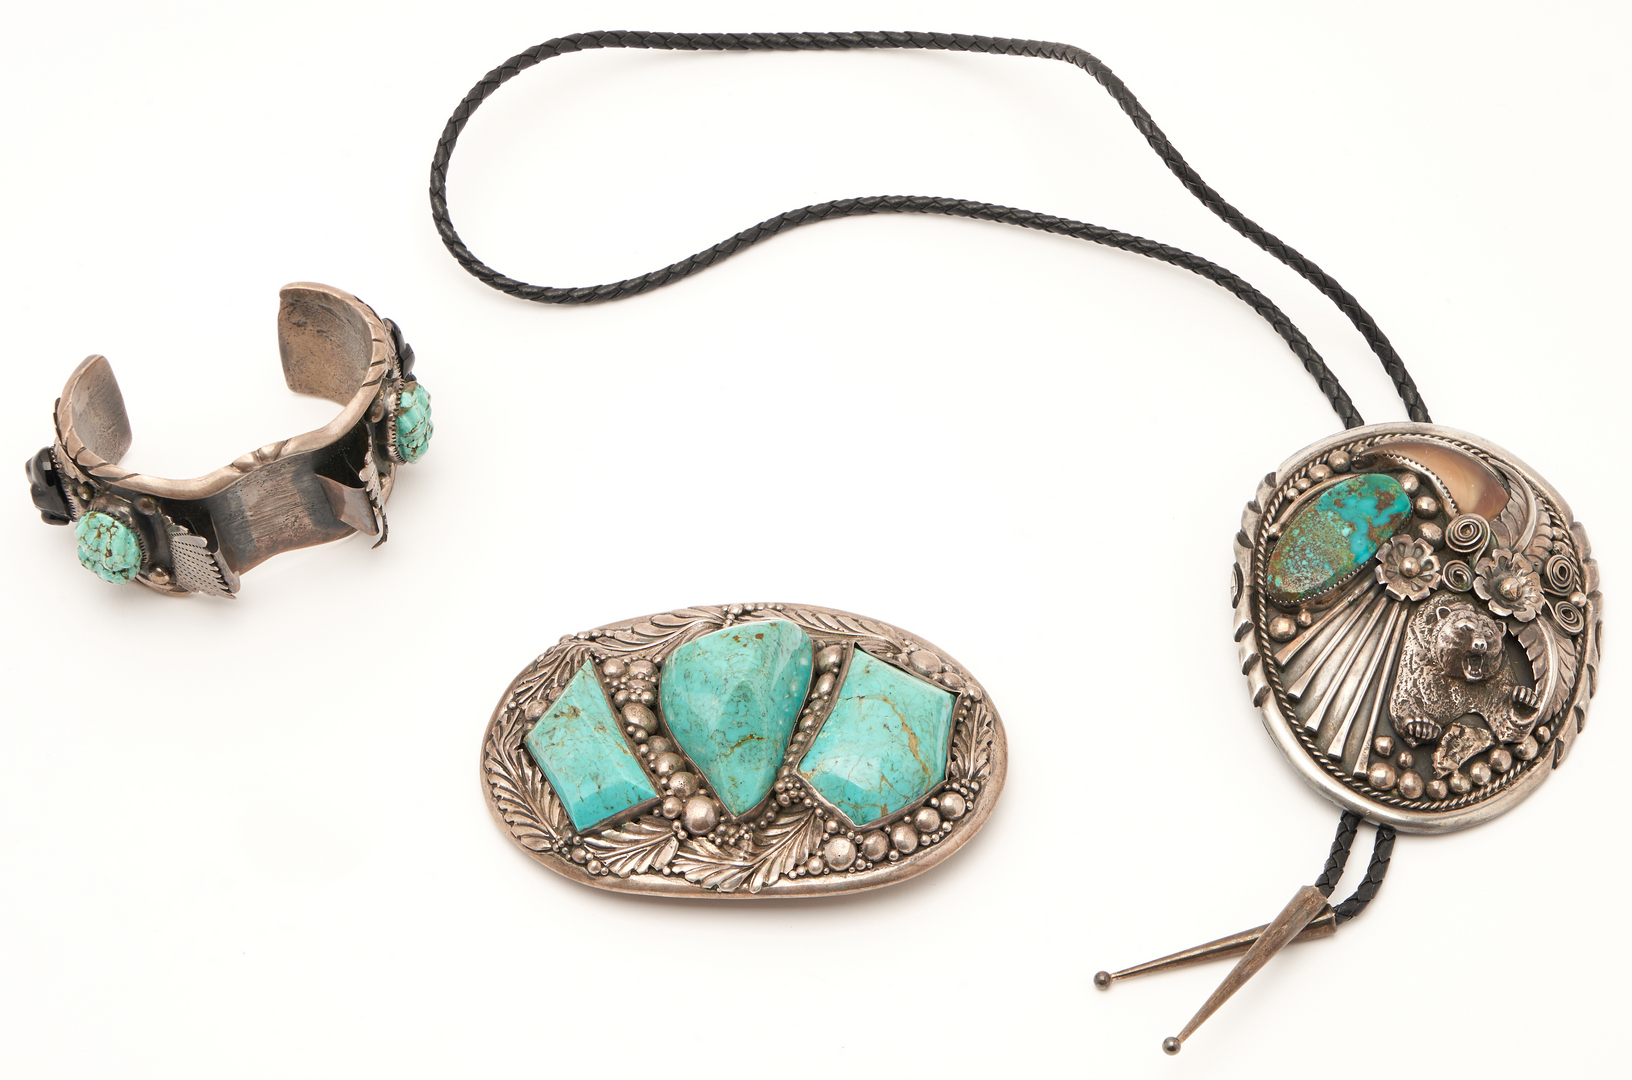 Lot 616: 3 Pcs. Southwest Native American Turquoise & Silver Jewelry